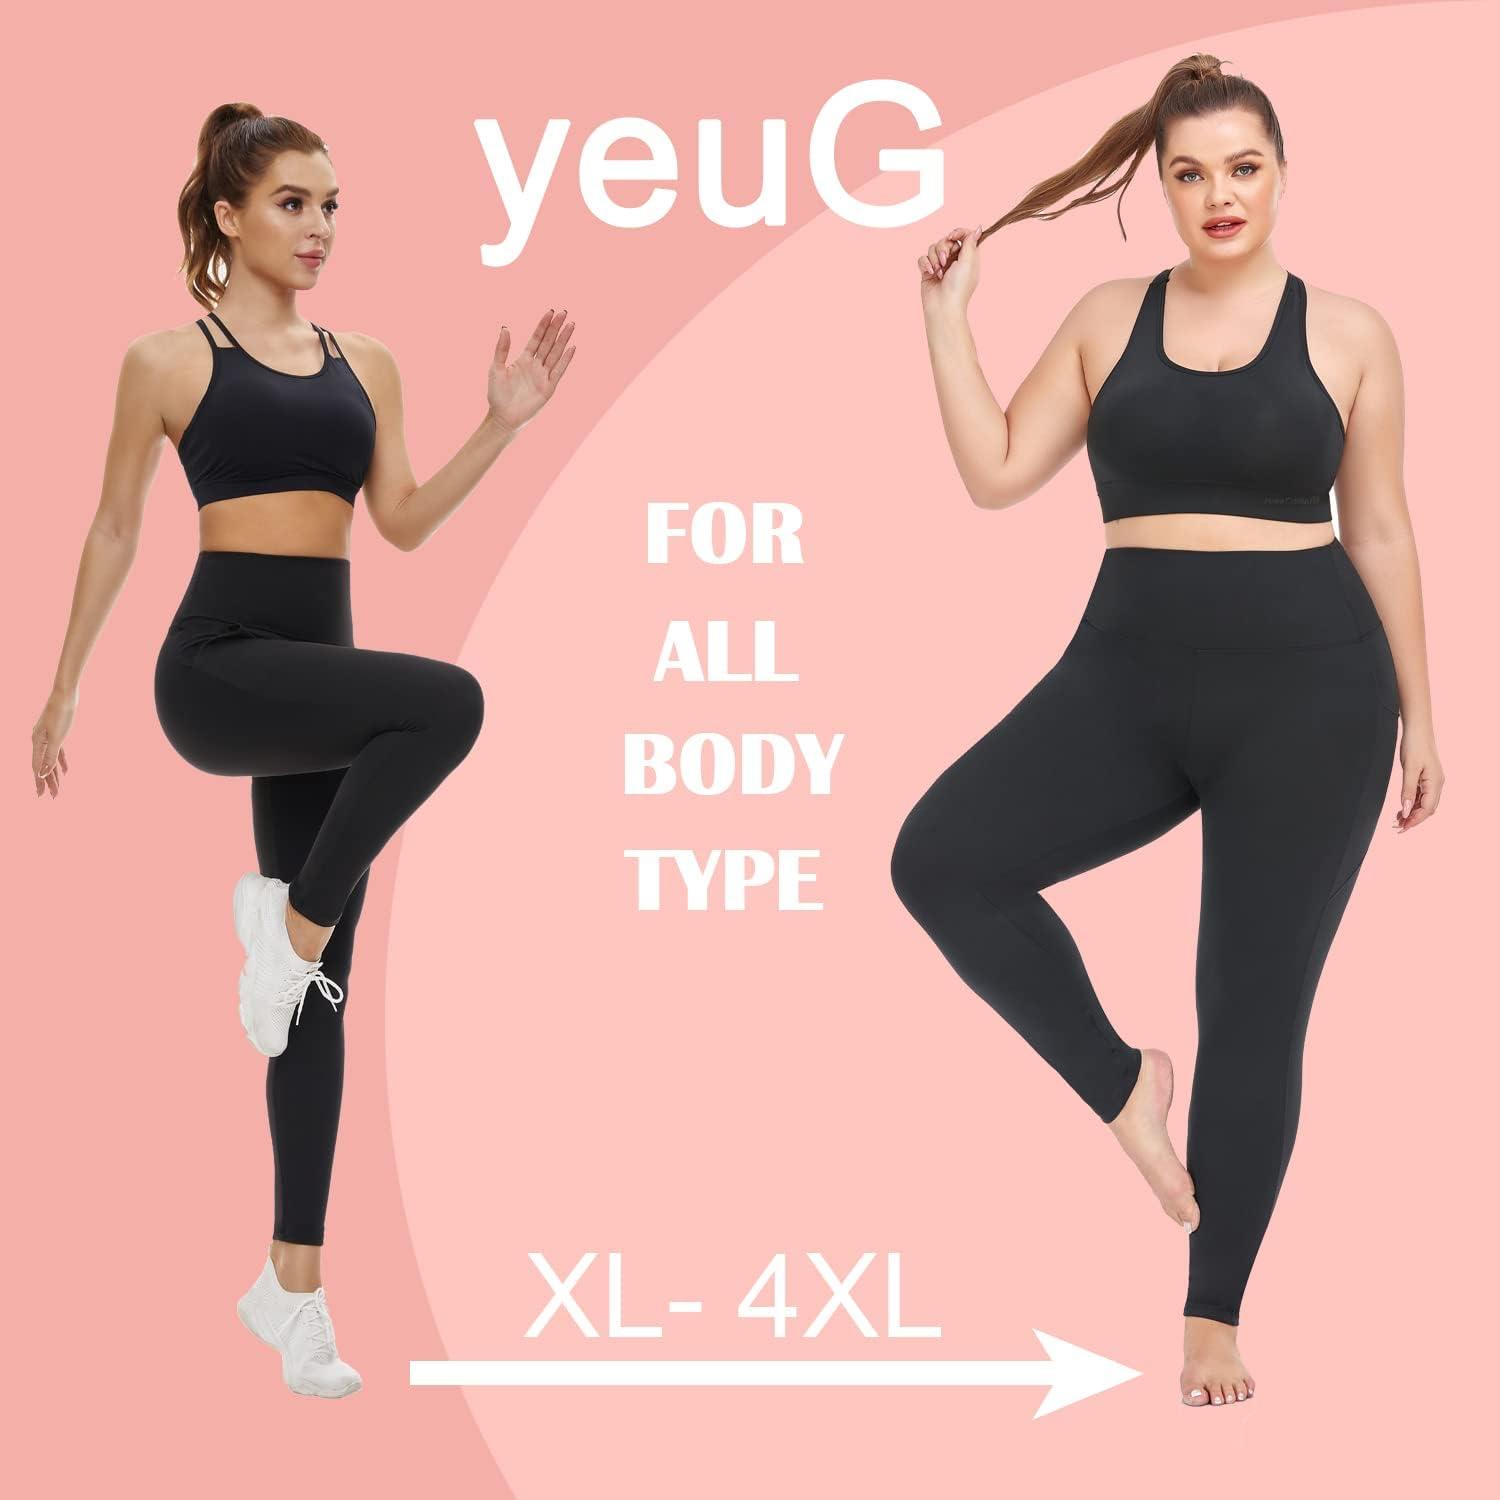 Buy yeuG Women's Plus Size Capri Leggings with Pockets-2 Pack High Waist  Tummy Control Workout Yoga Pants XL - 4XL at